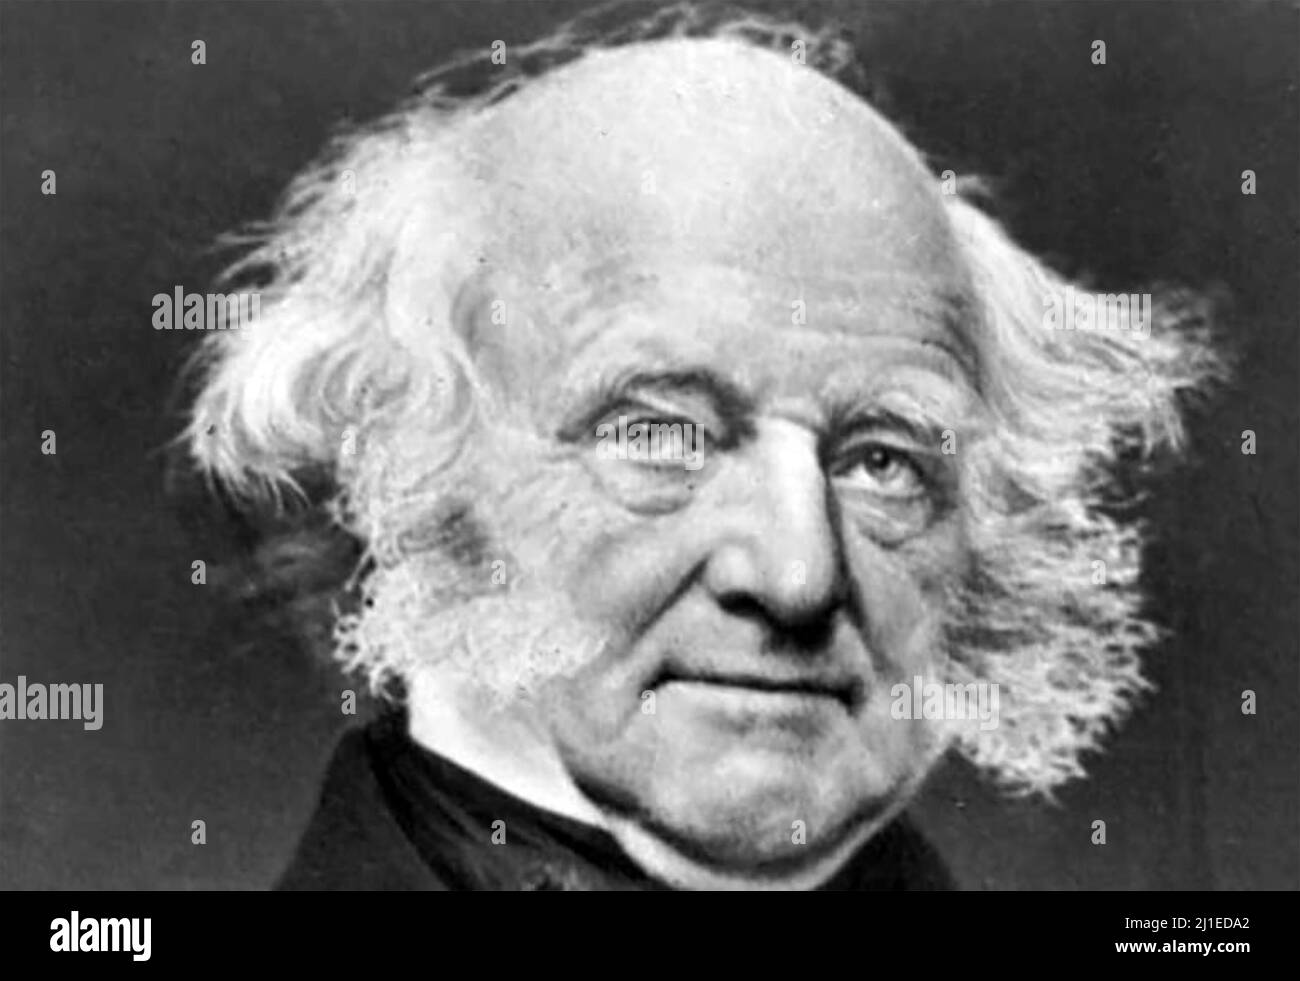 MARTIN van BUREN (1782-1862) American lawyer and 8th President of the United States, Photo by Mathew Brady about 1856/ Stock Photo